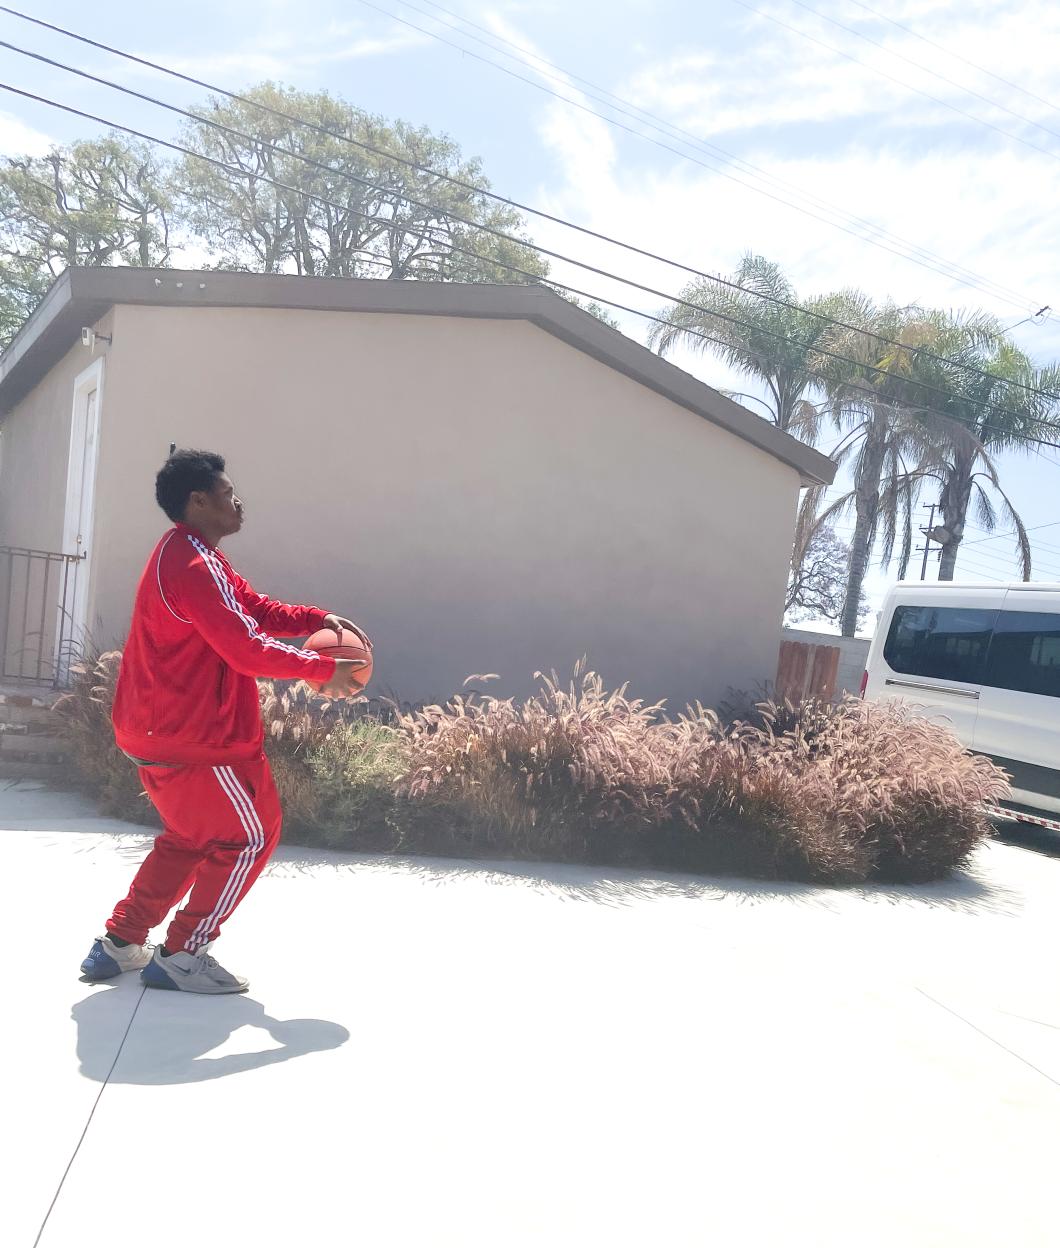 Black man in red tracksuit appears to be in motion as he holds a basketball on a driveway